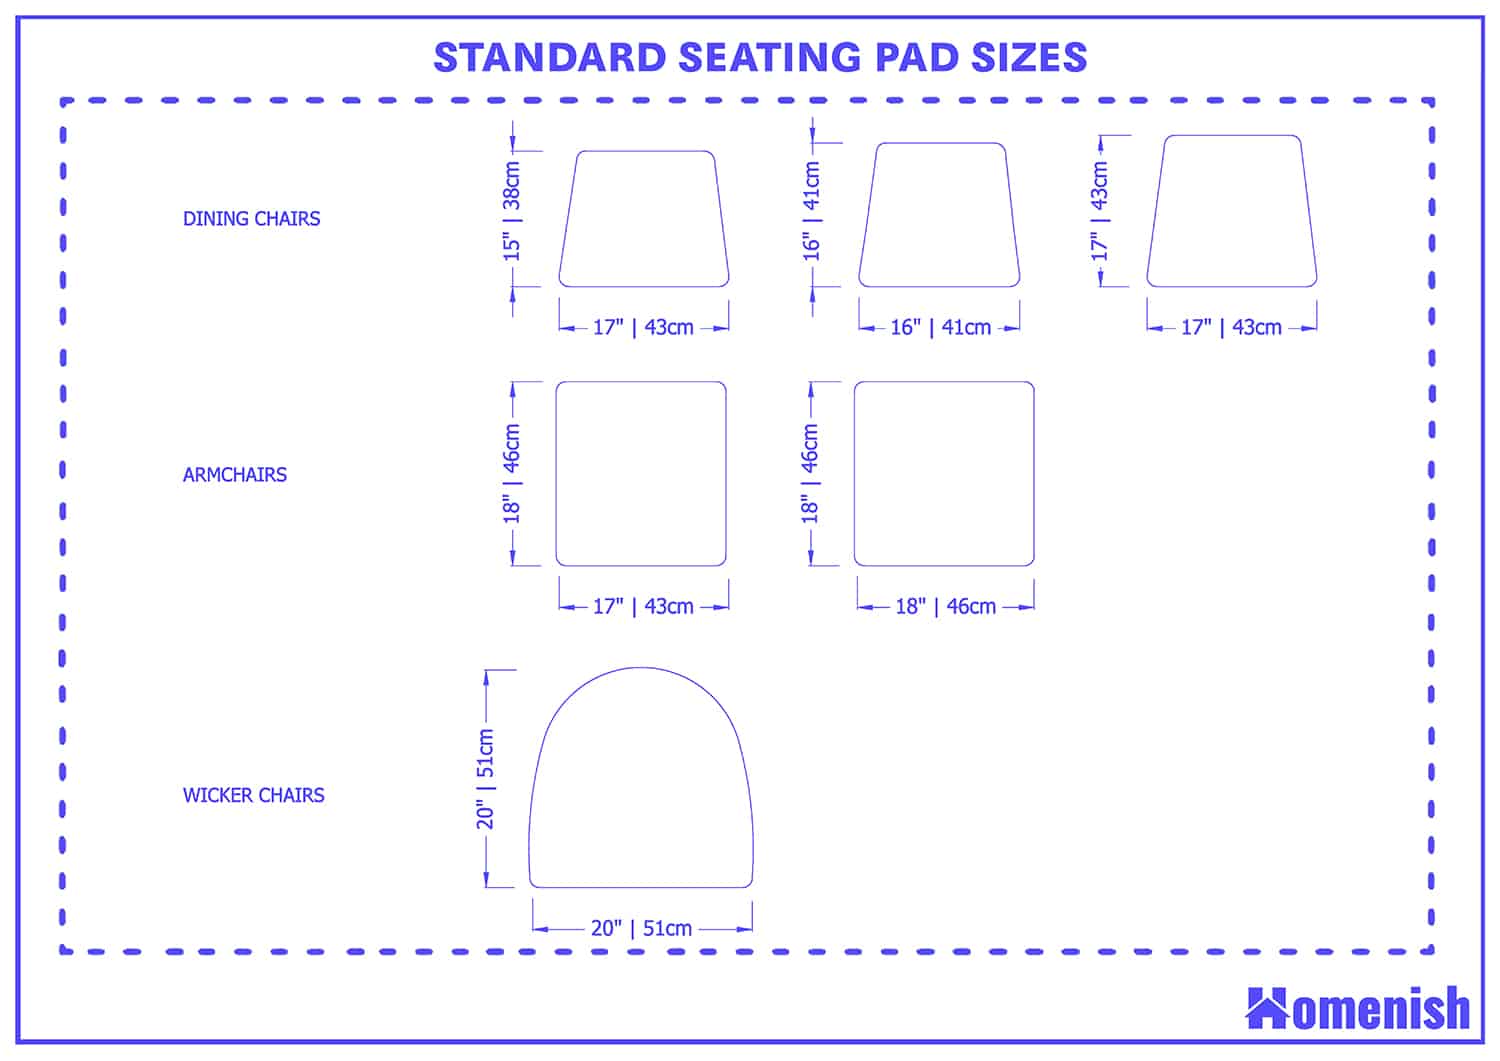 Standard Seating Pad Sizes For Different Types of Chairs